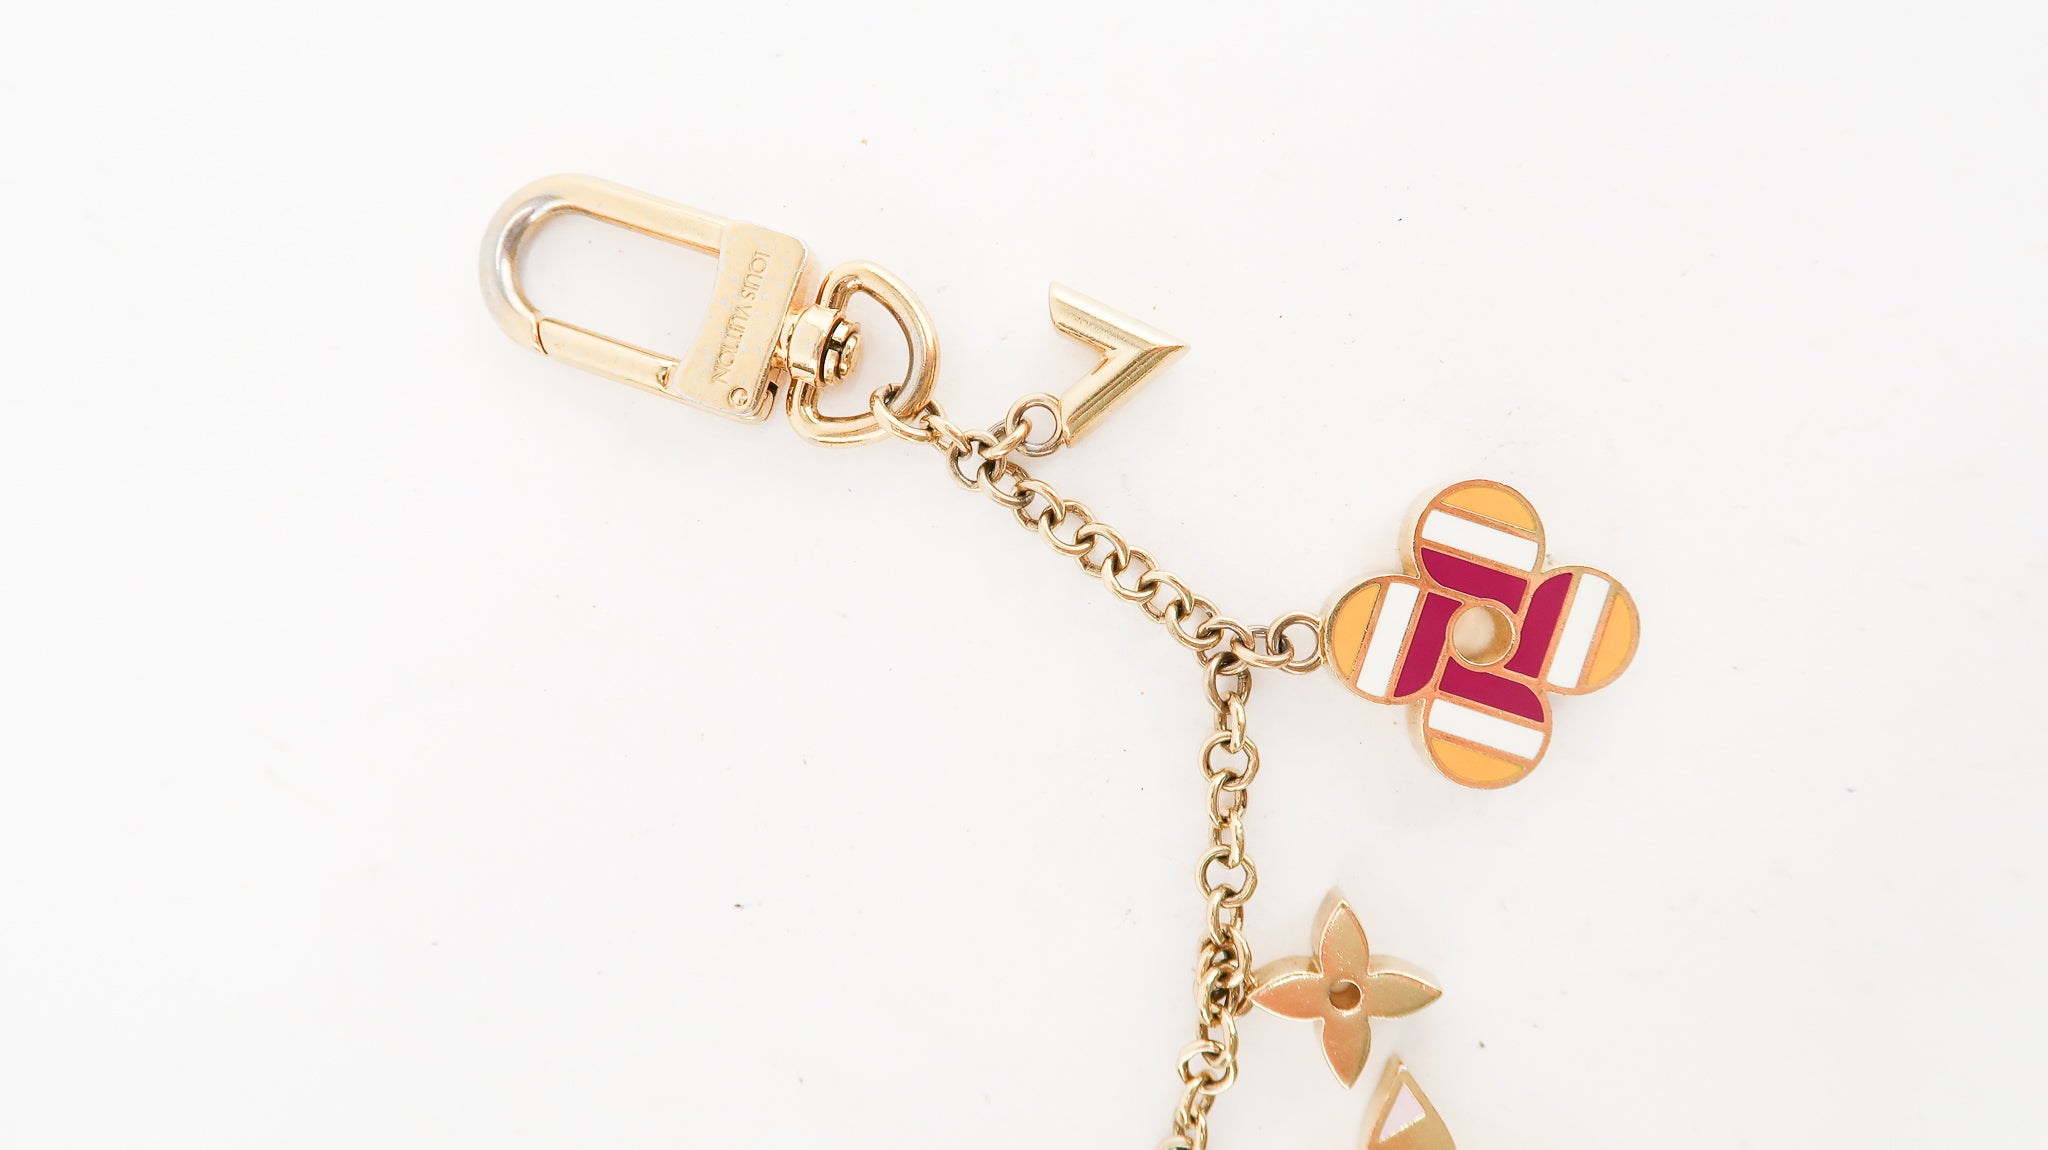 Louis Vuitton Authentic Dreamcatcher Very LV Bag Charm - $528 - From  SAMANTHA